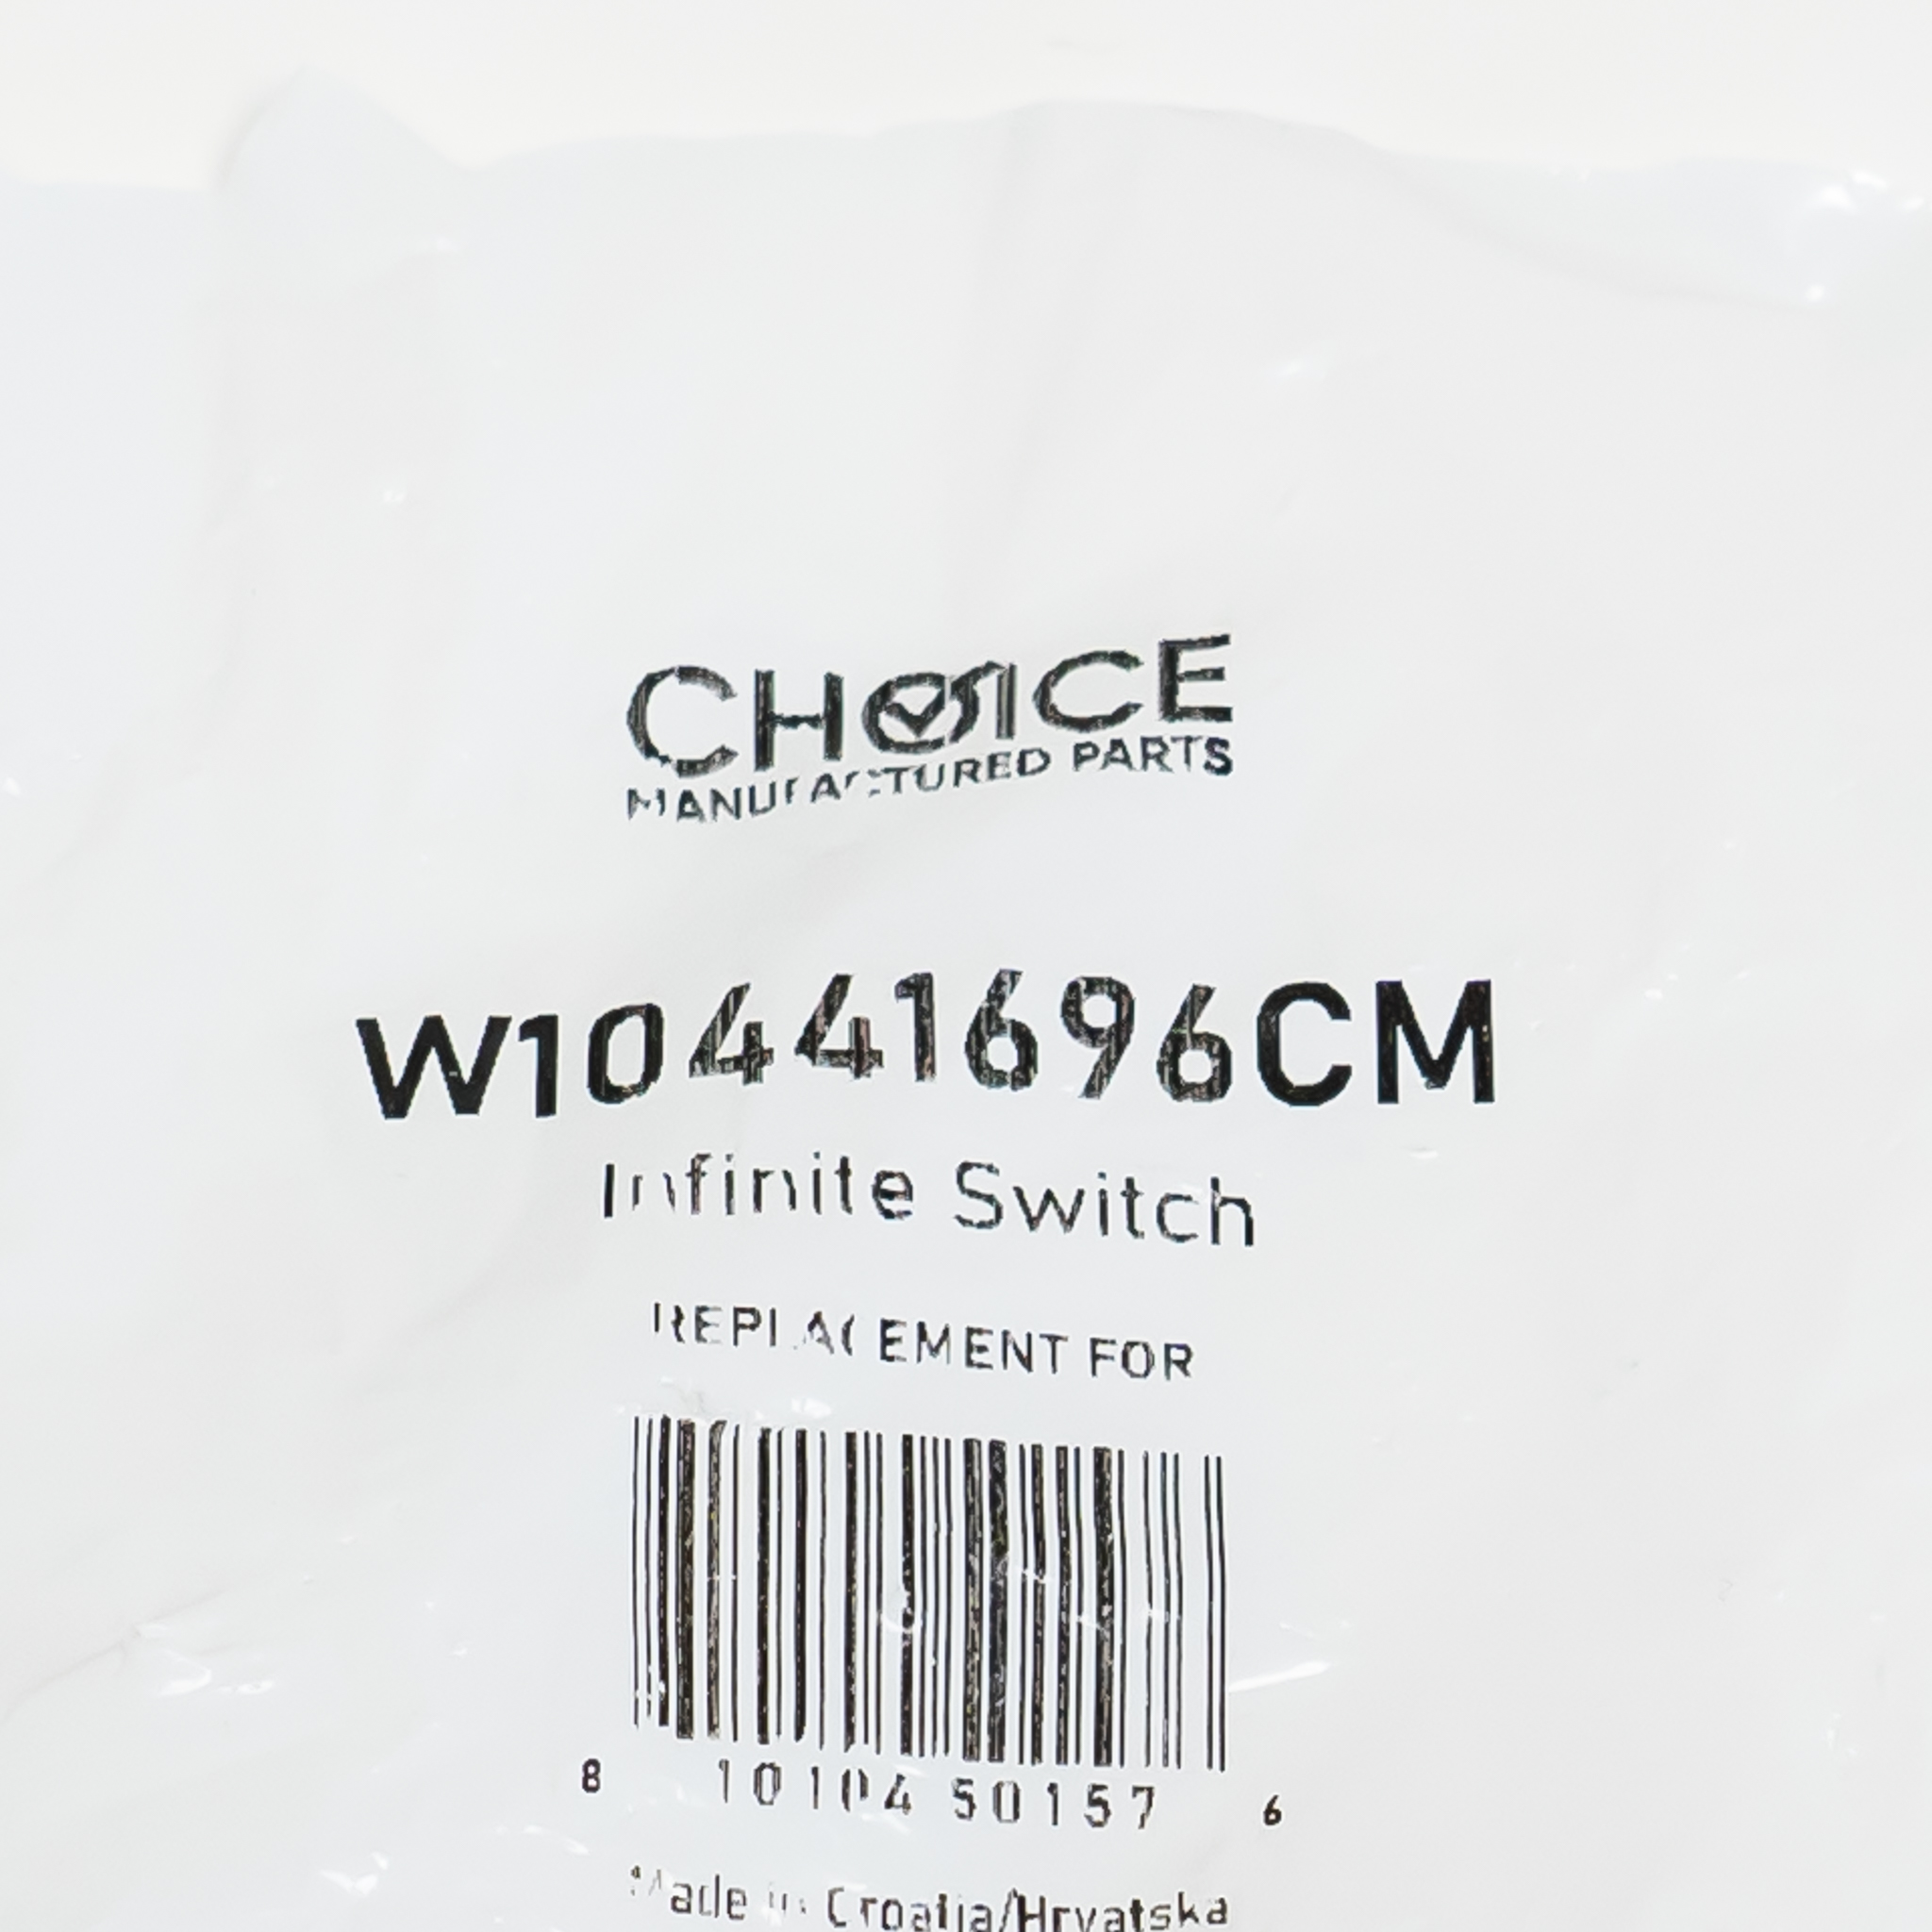 Choice Part W10441696 Range Burner Infinite Switch Control for Whirlpool - image 4 of 4